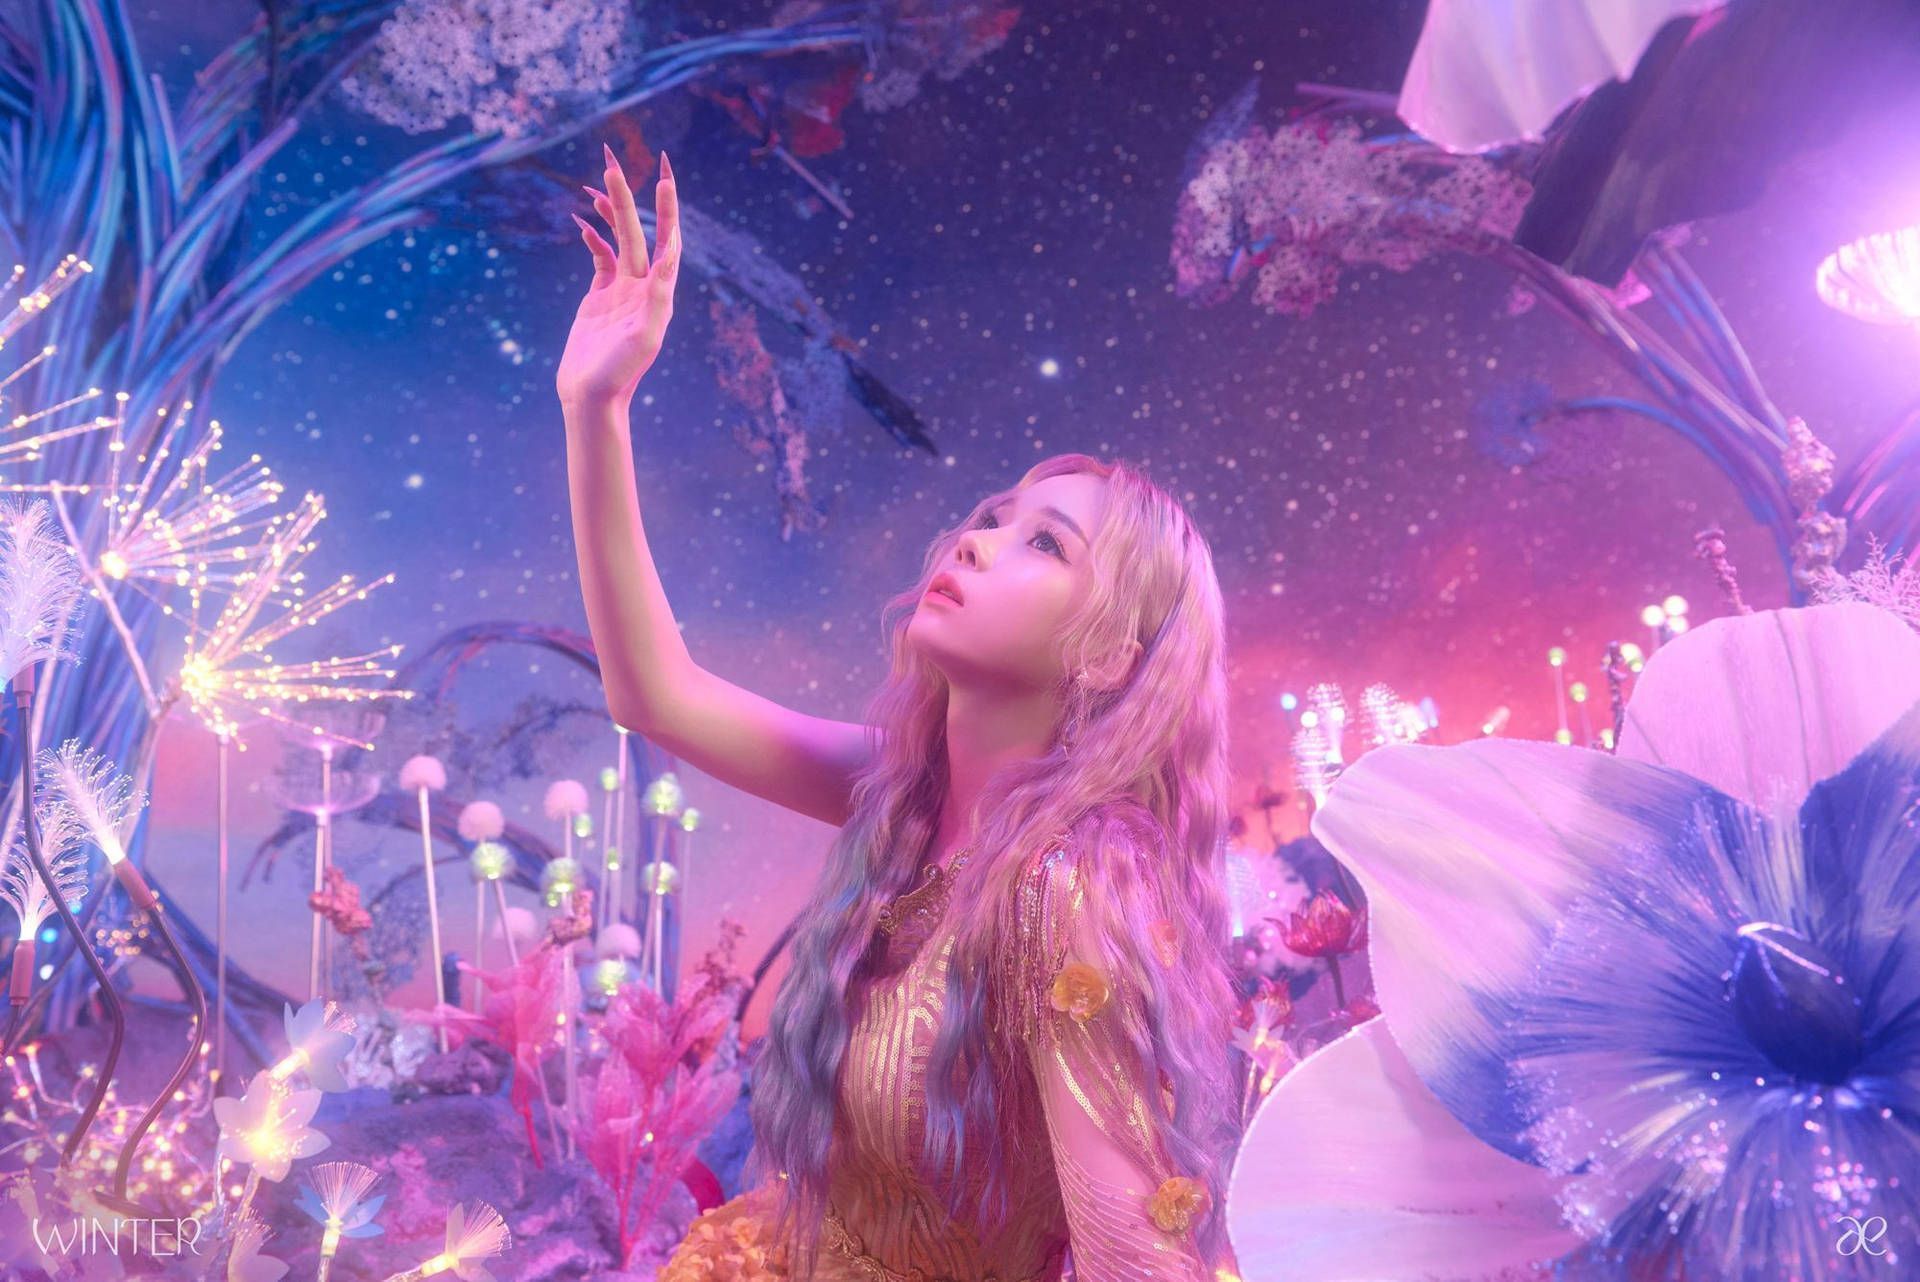 The image is a beautiful scene of a woman with pink hair dressed in a pink and gold dress, surrounded by flowers and lights. The image has a dreamy and fantasy aesthetic. - Aespa